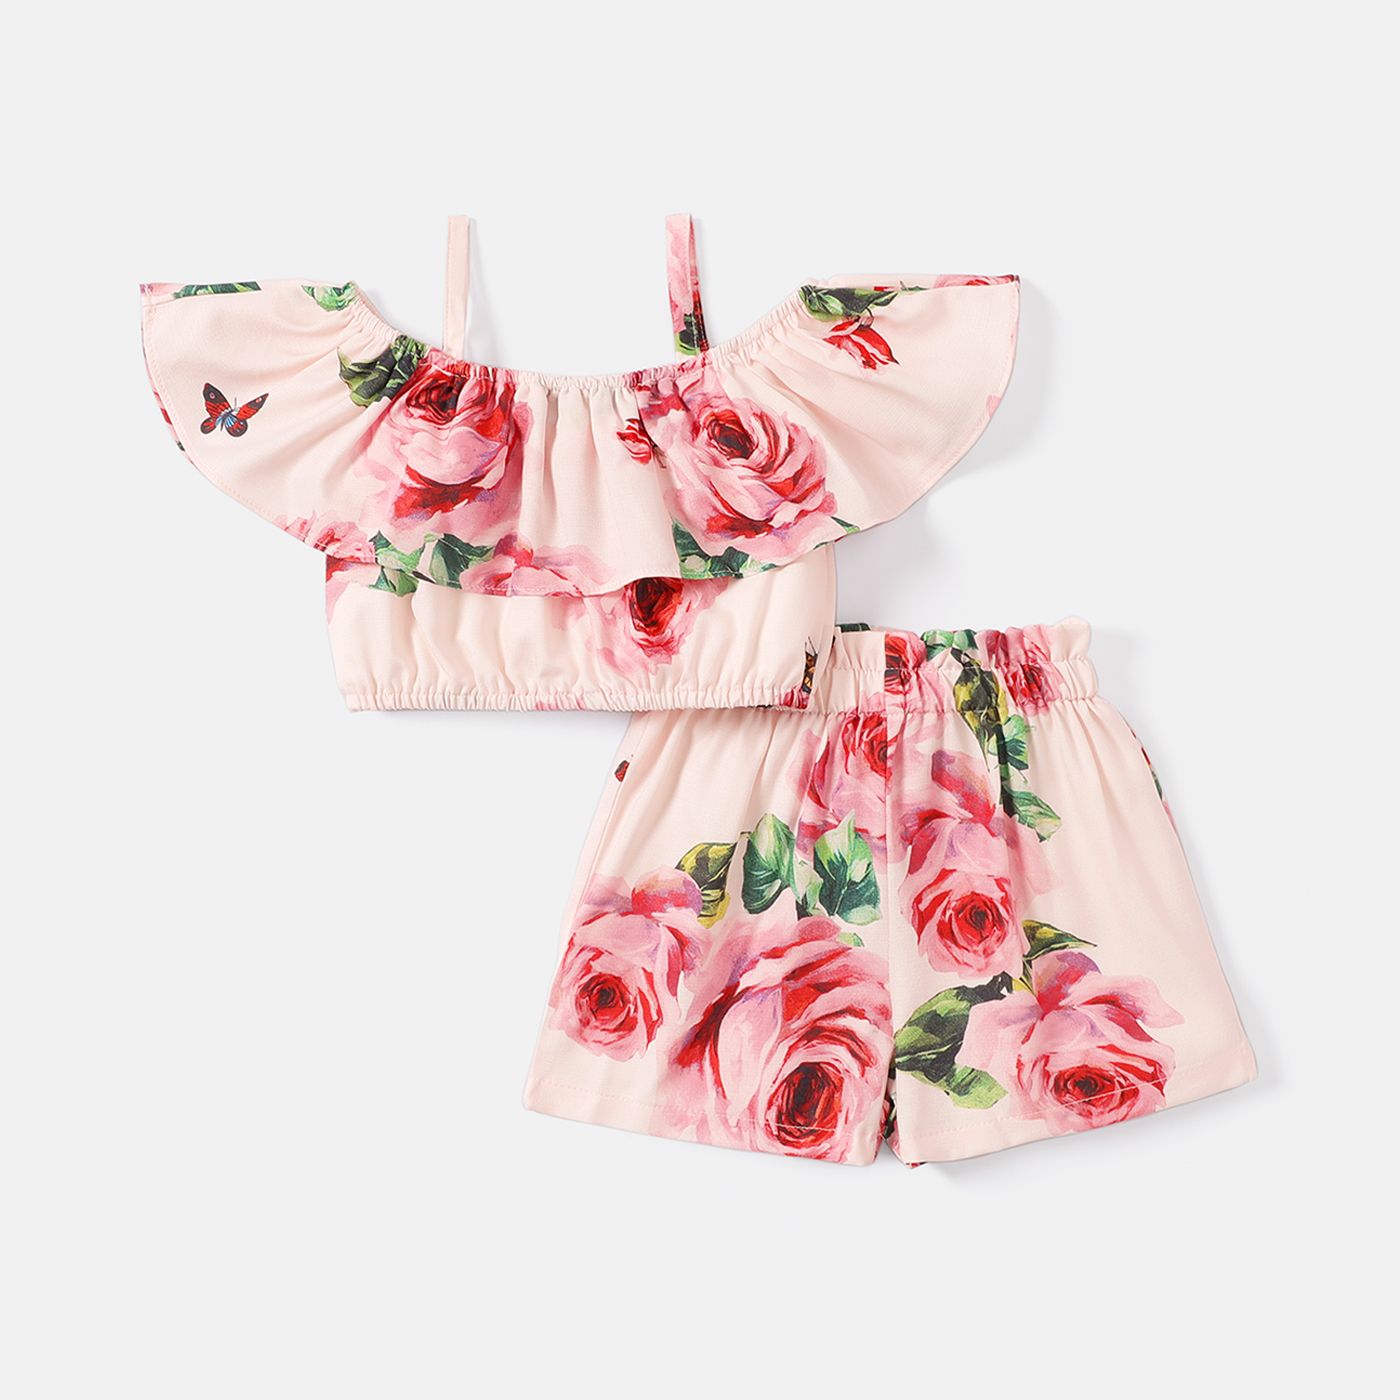 

Baby Girl Allover Floral Print Pink Ruffle Trim Cami Crop Top & Shorts Set or Dress